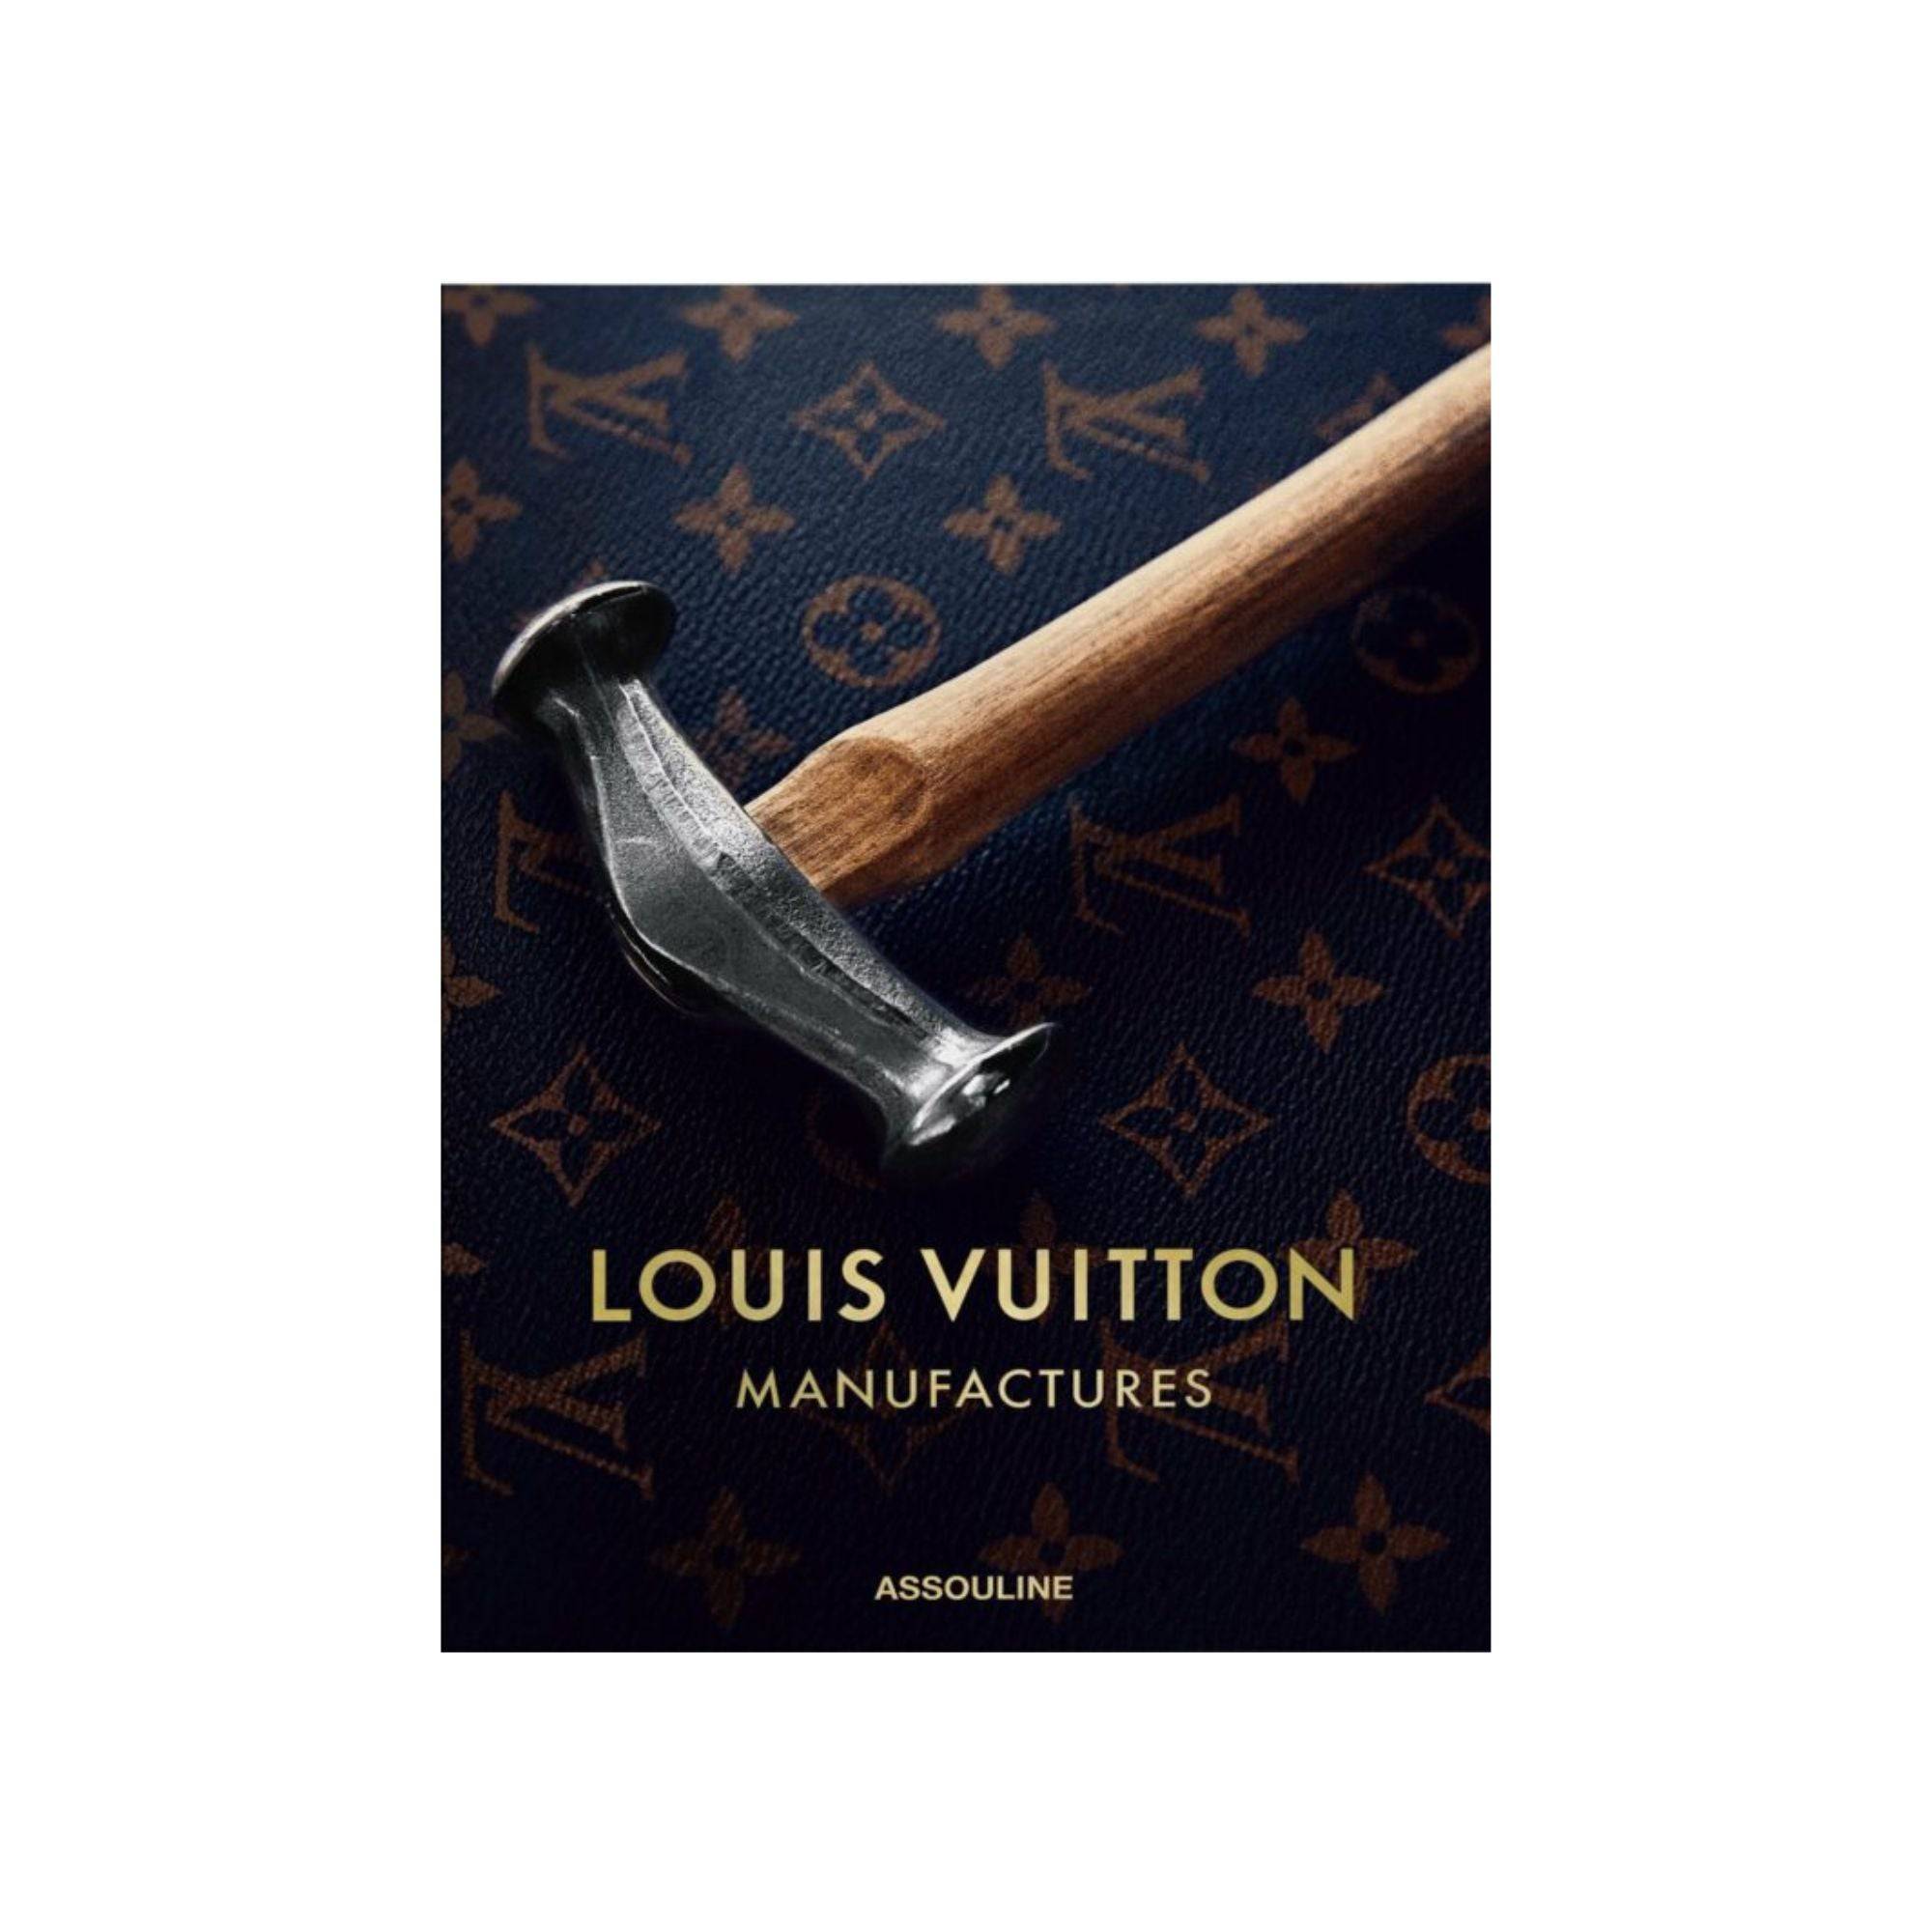 Louis Vuitton Manufactures - THAT COOL LIVING